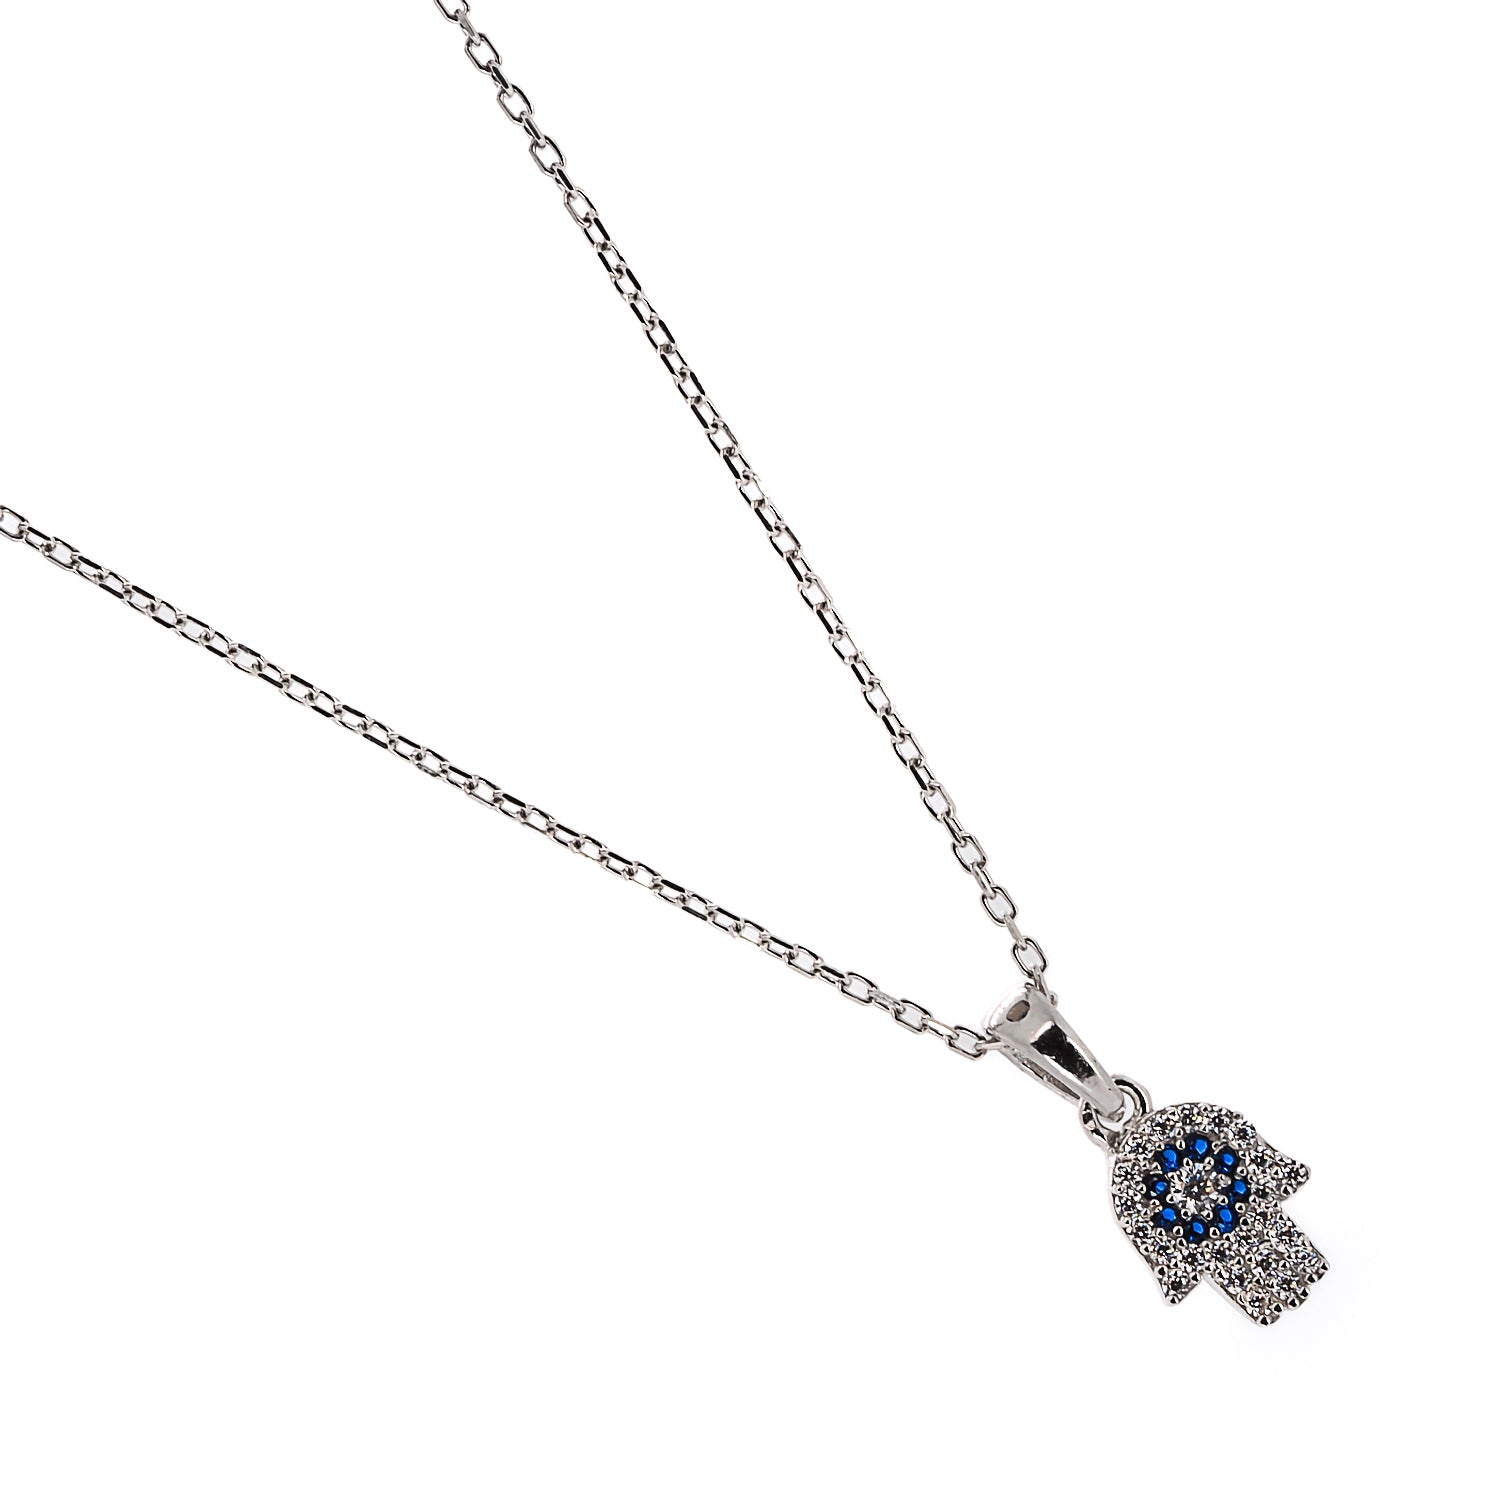 Sterling Silver Necklace with Mini Hamsa Hand Pendant - Handcrafted for Uniqueness.